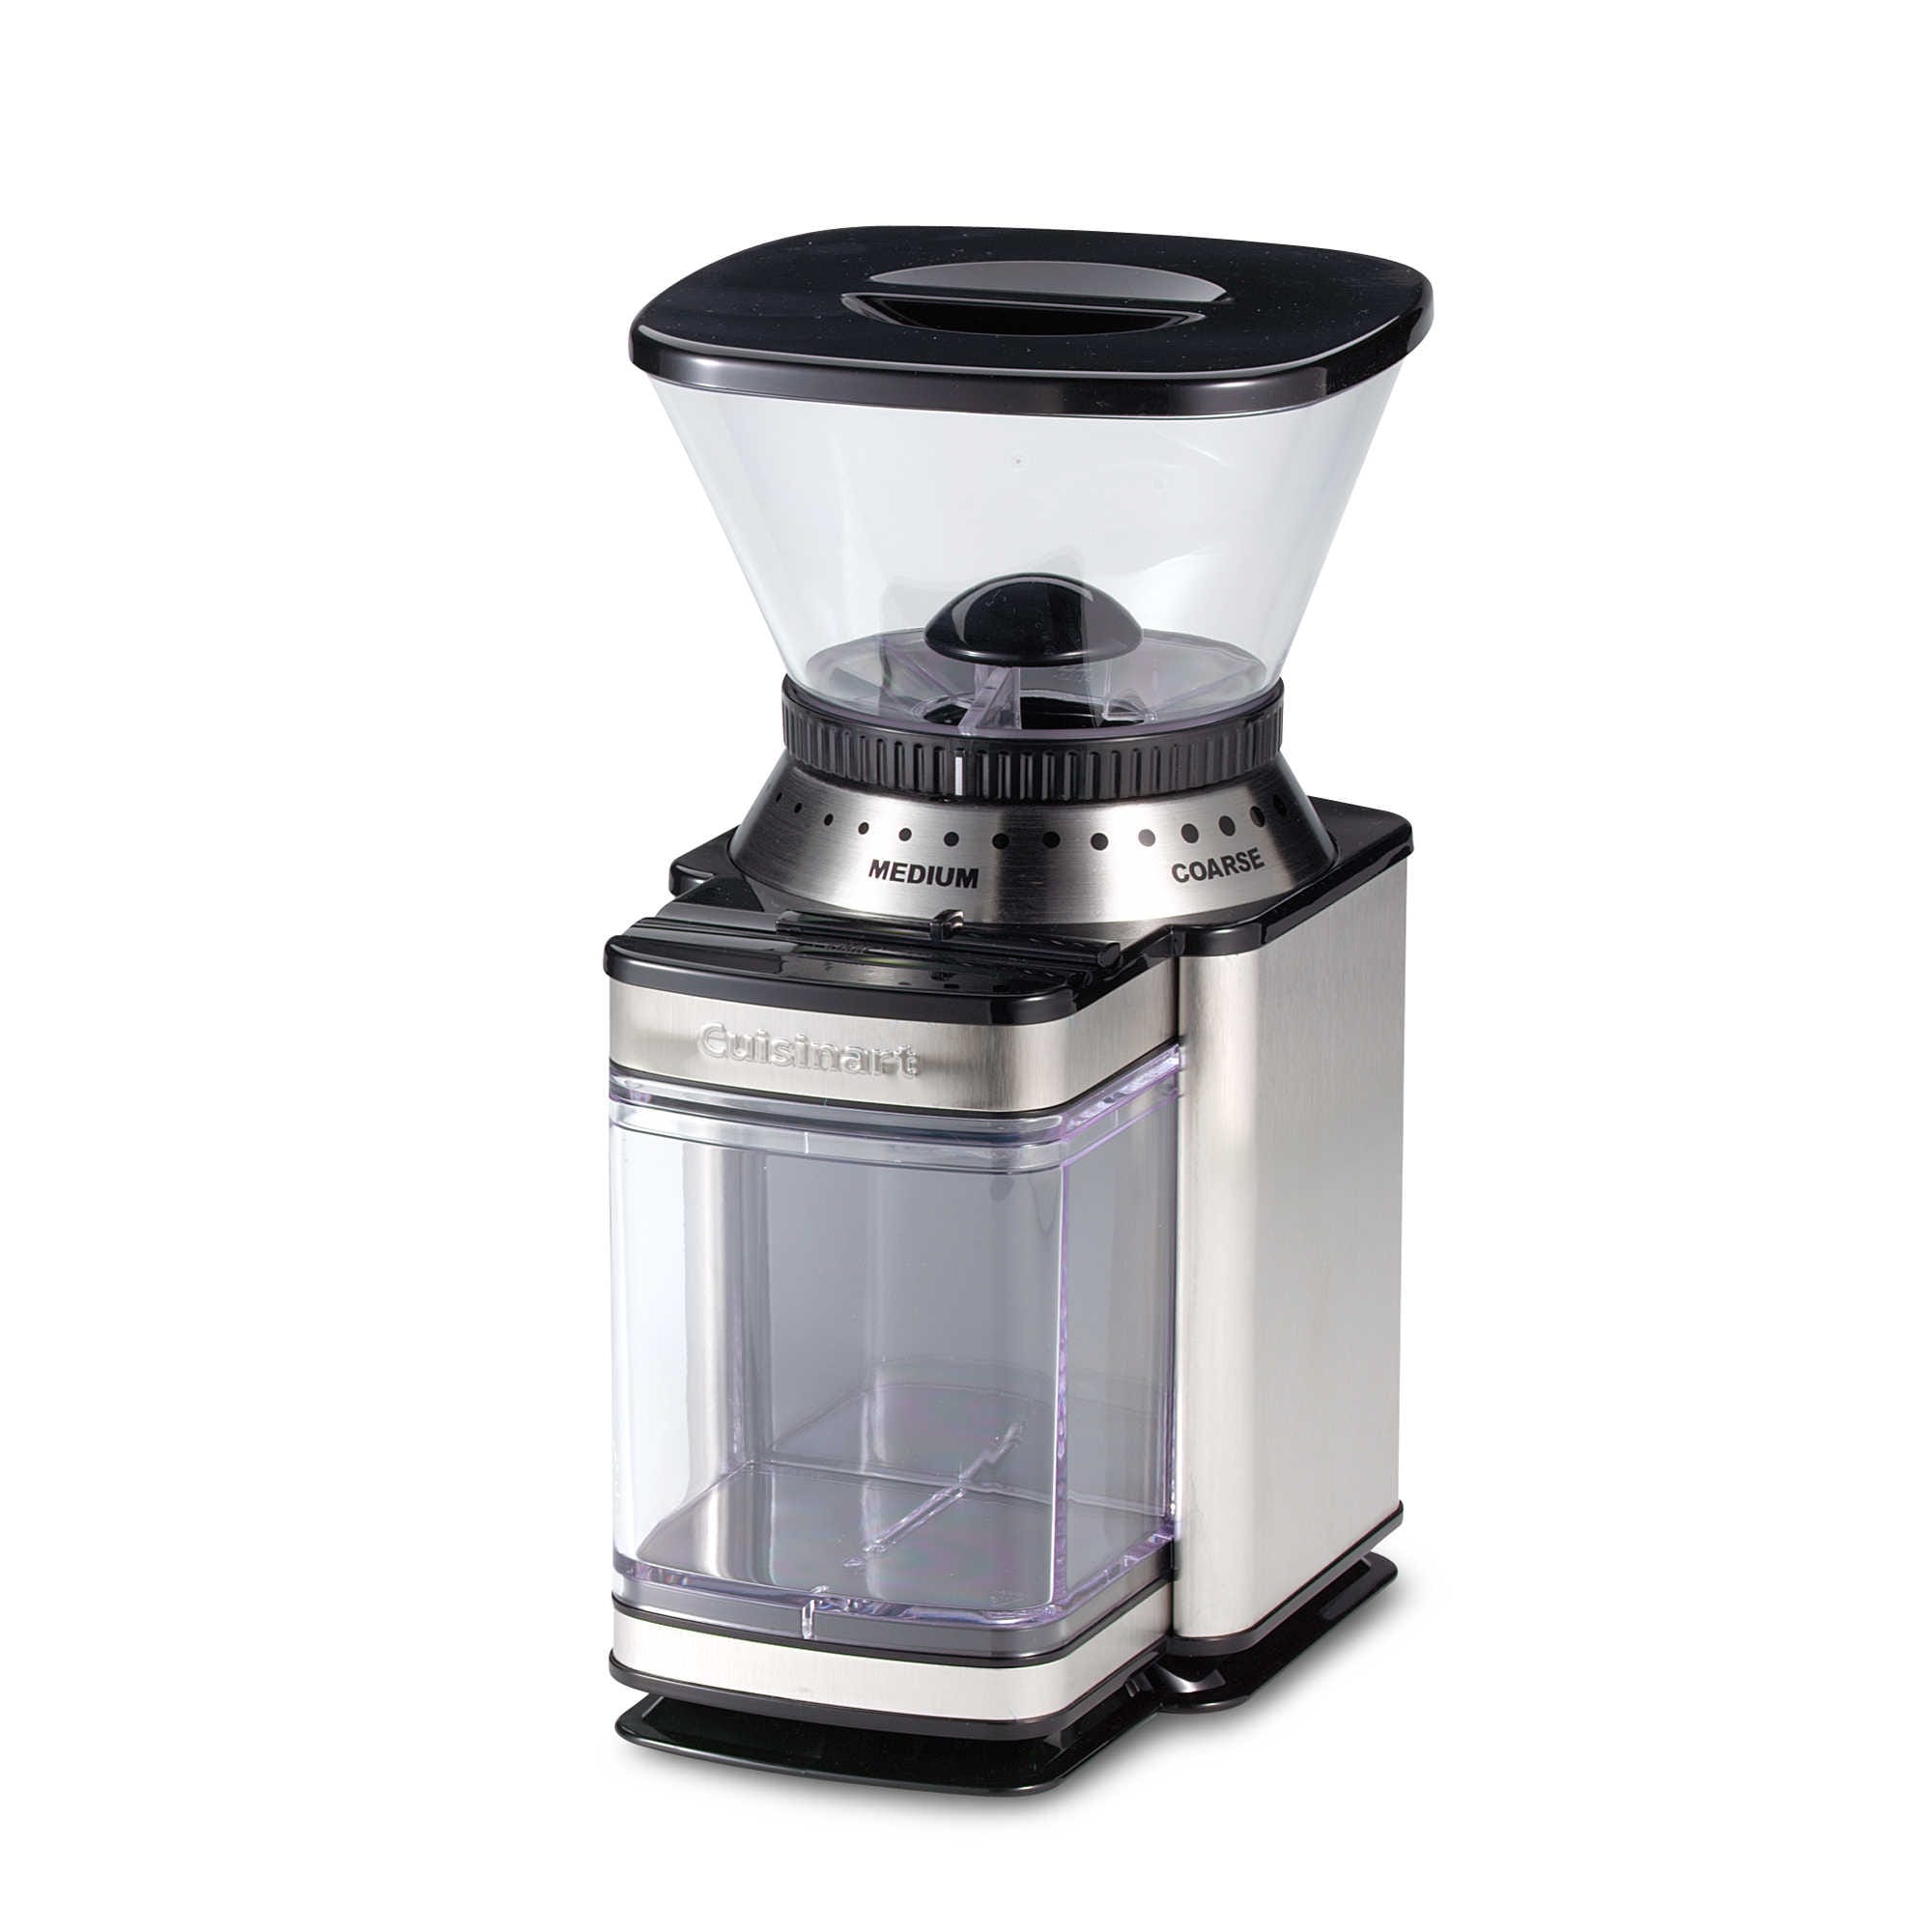 https://ak1.ostkcdn.com/images/products/is/images/direct/c6fa4d8bfac3935530fc1824bf92d2d9f50fb4c7/Cuisinart-DBM-8-Supreme-Grind-Automatic-Burr-Mill%2CStainless.jpg